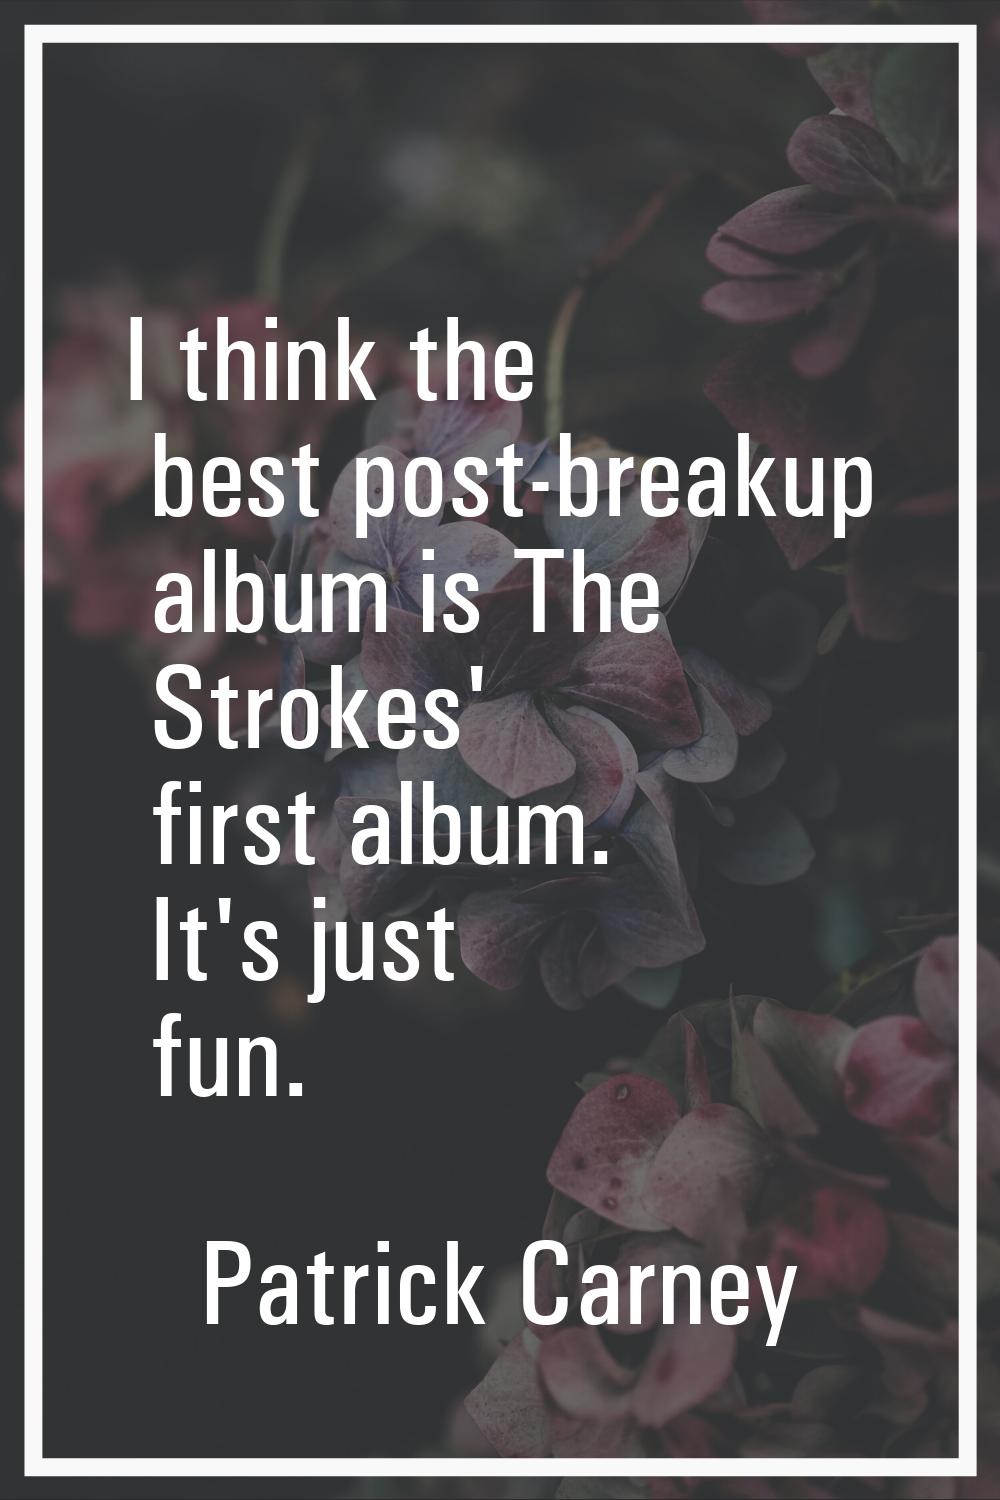 I think the best post-breakup album is The Strokes' first album. It's just fun.